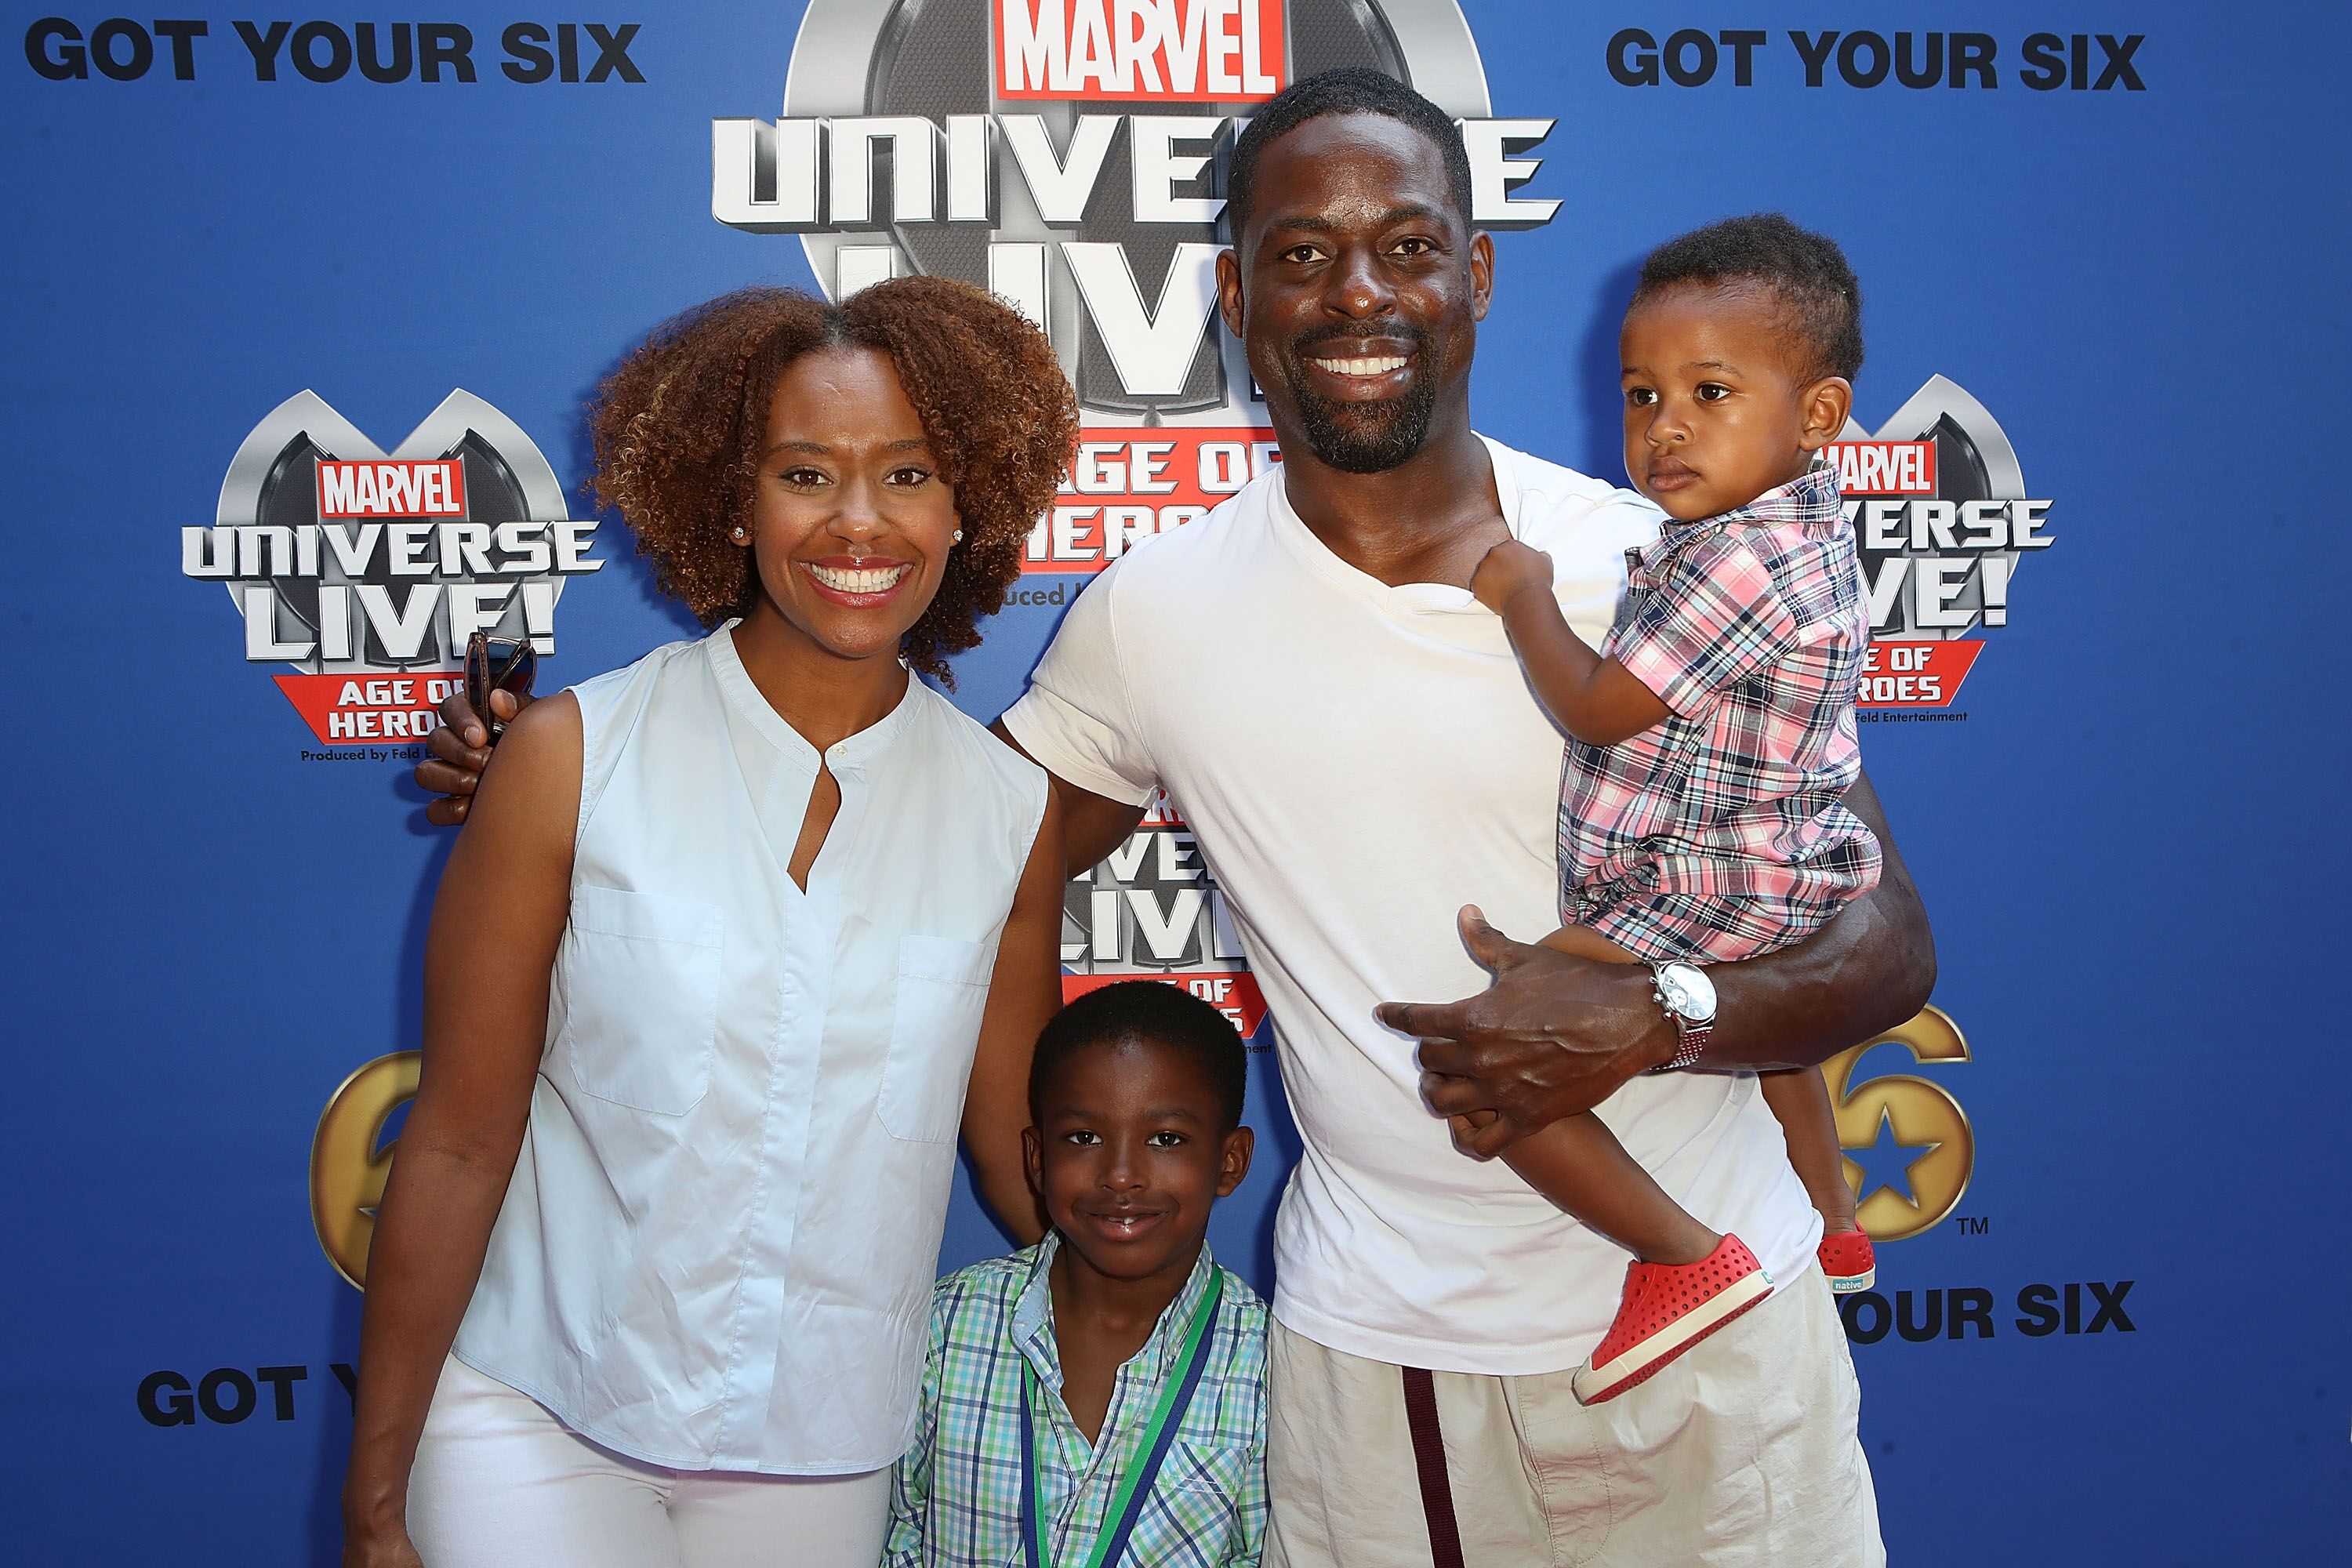 Sterling K. Brown, Ryan Michelle Bathe and their two children attending the "Marvel Universe Live!" premiere | Source: Getty Images/GlobalImagesUkraine